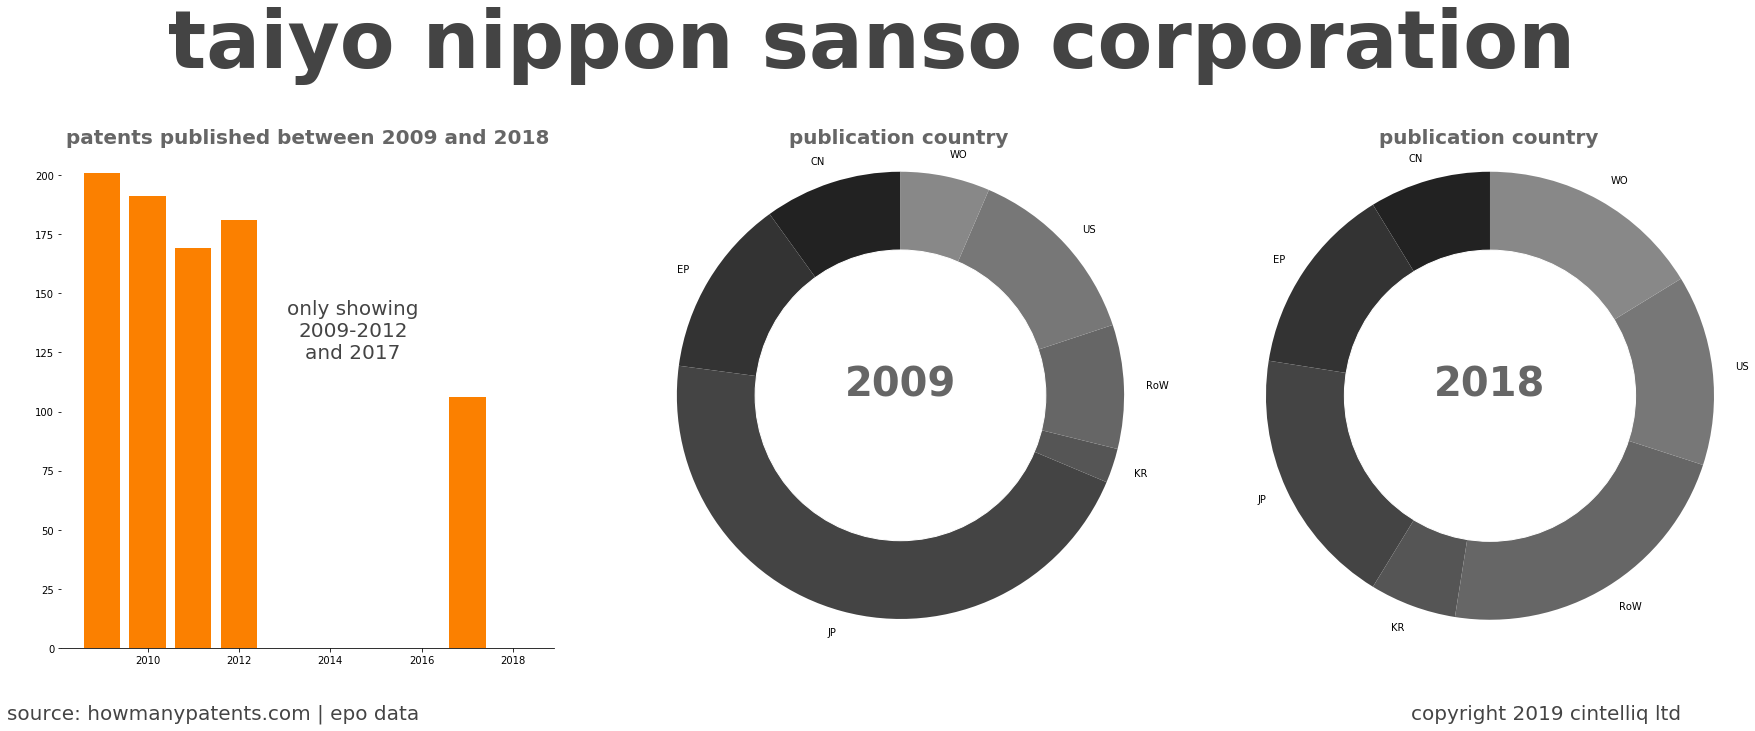 summary of patents for Taiyo Nippon Sanso Corporation